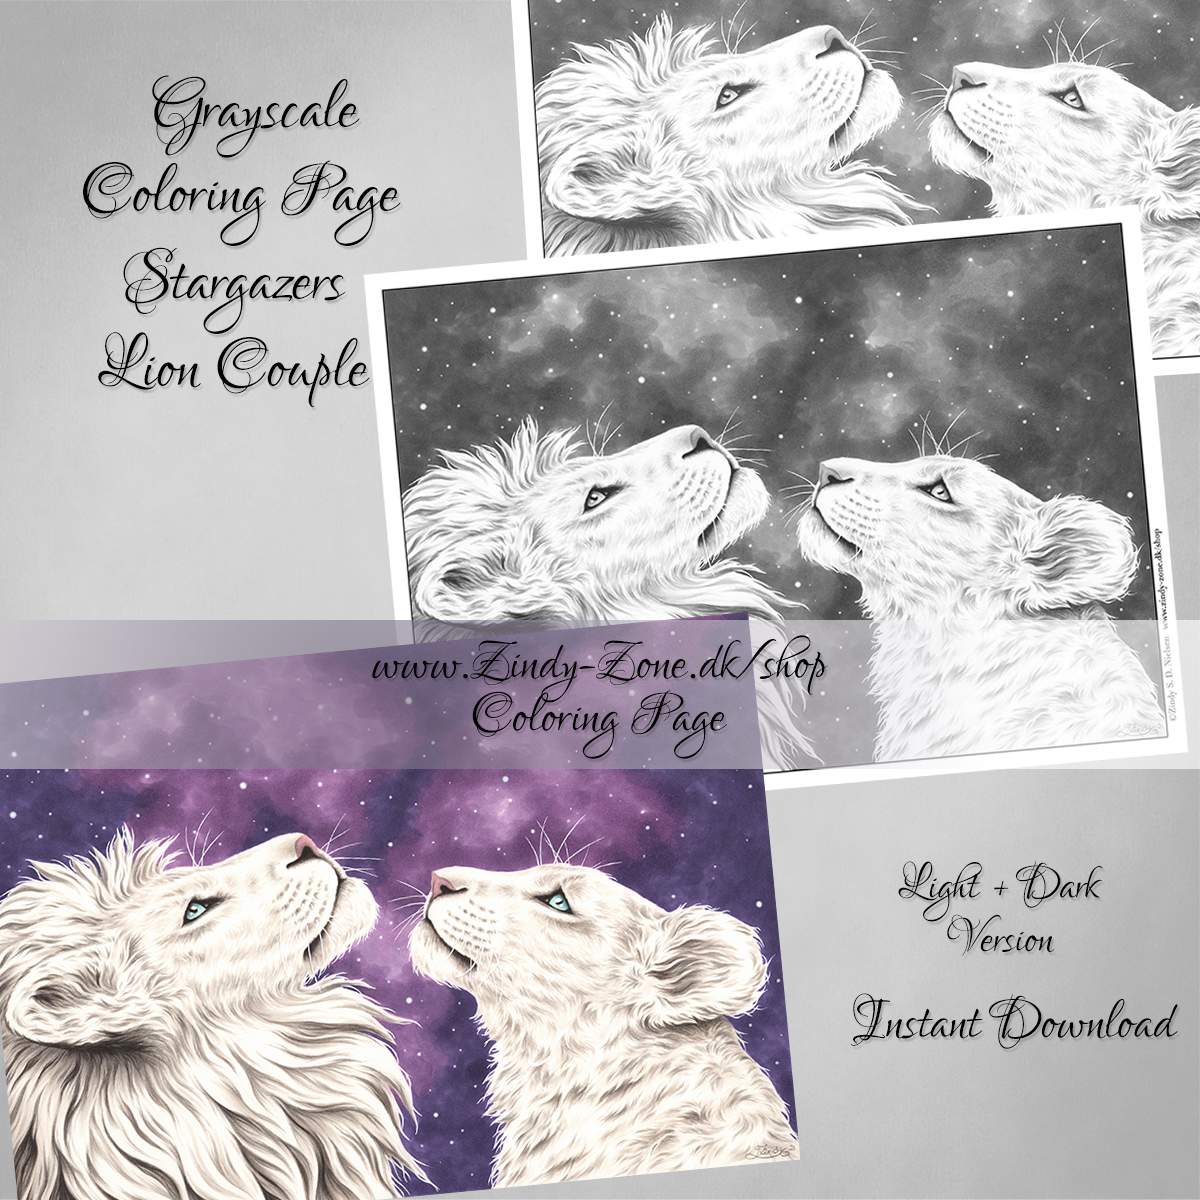 Stargazers Lion Couple Coloring Page - Grayscale